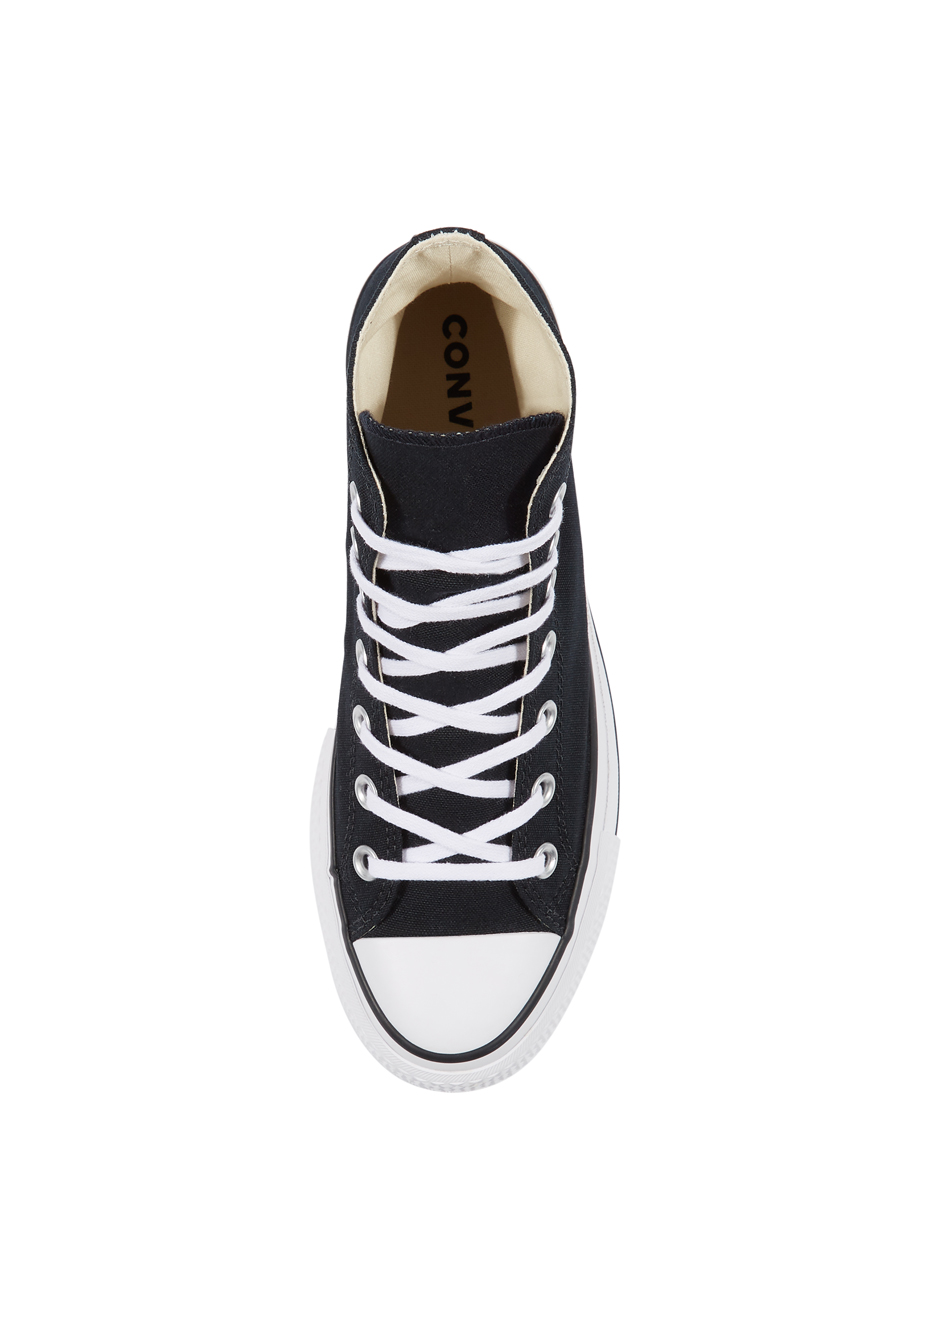 black and white converse high tops womens